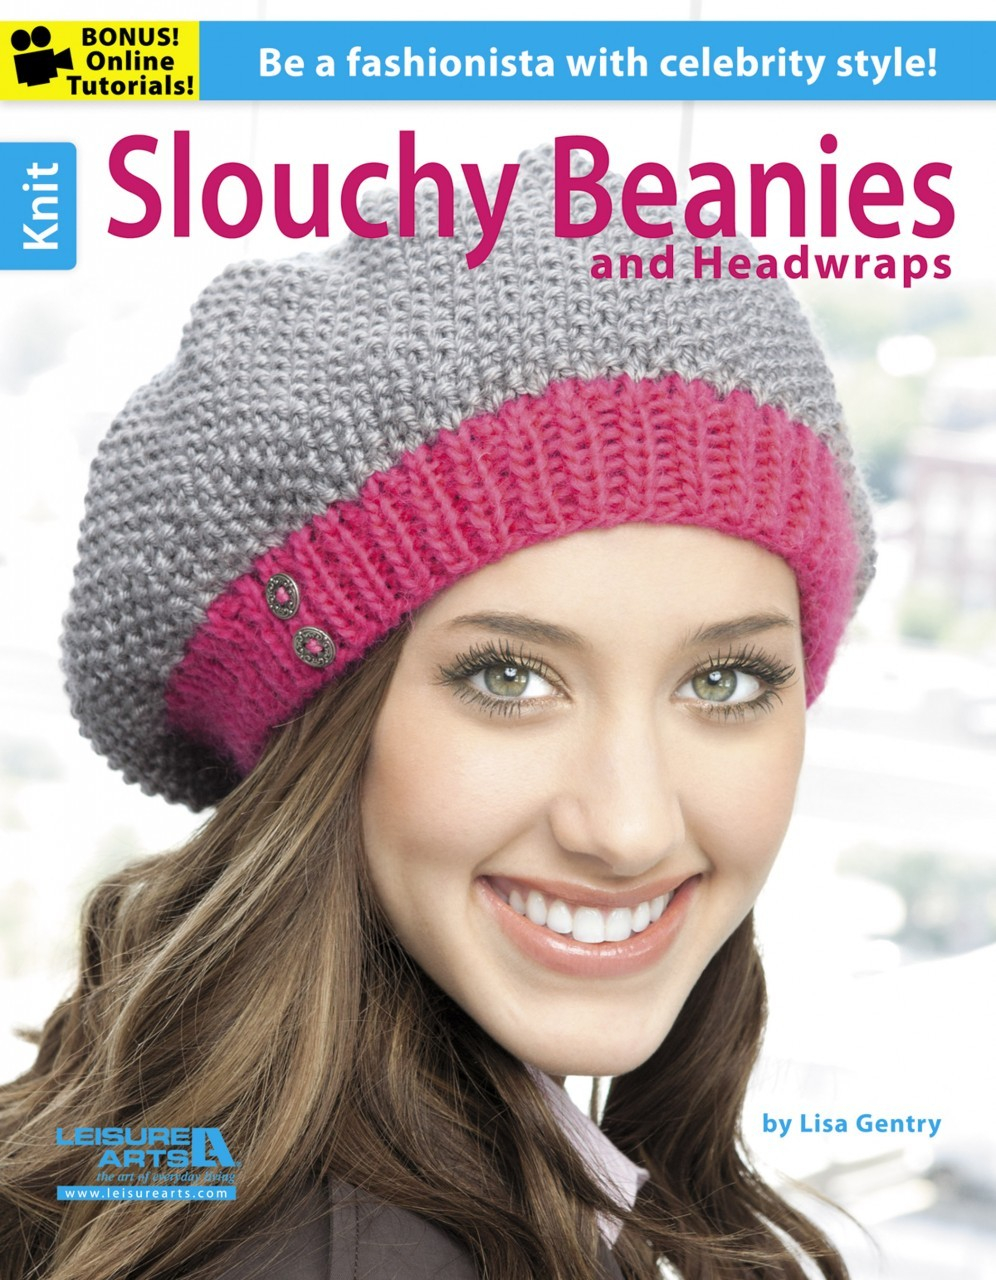 Knitted Slouchy Hat Pattern Knit Slouchy Beanies Headwraps